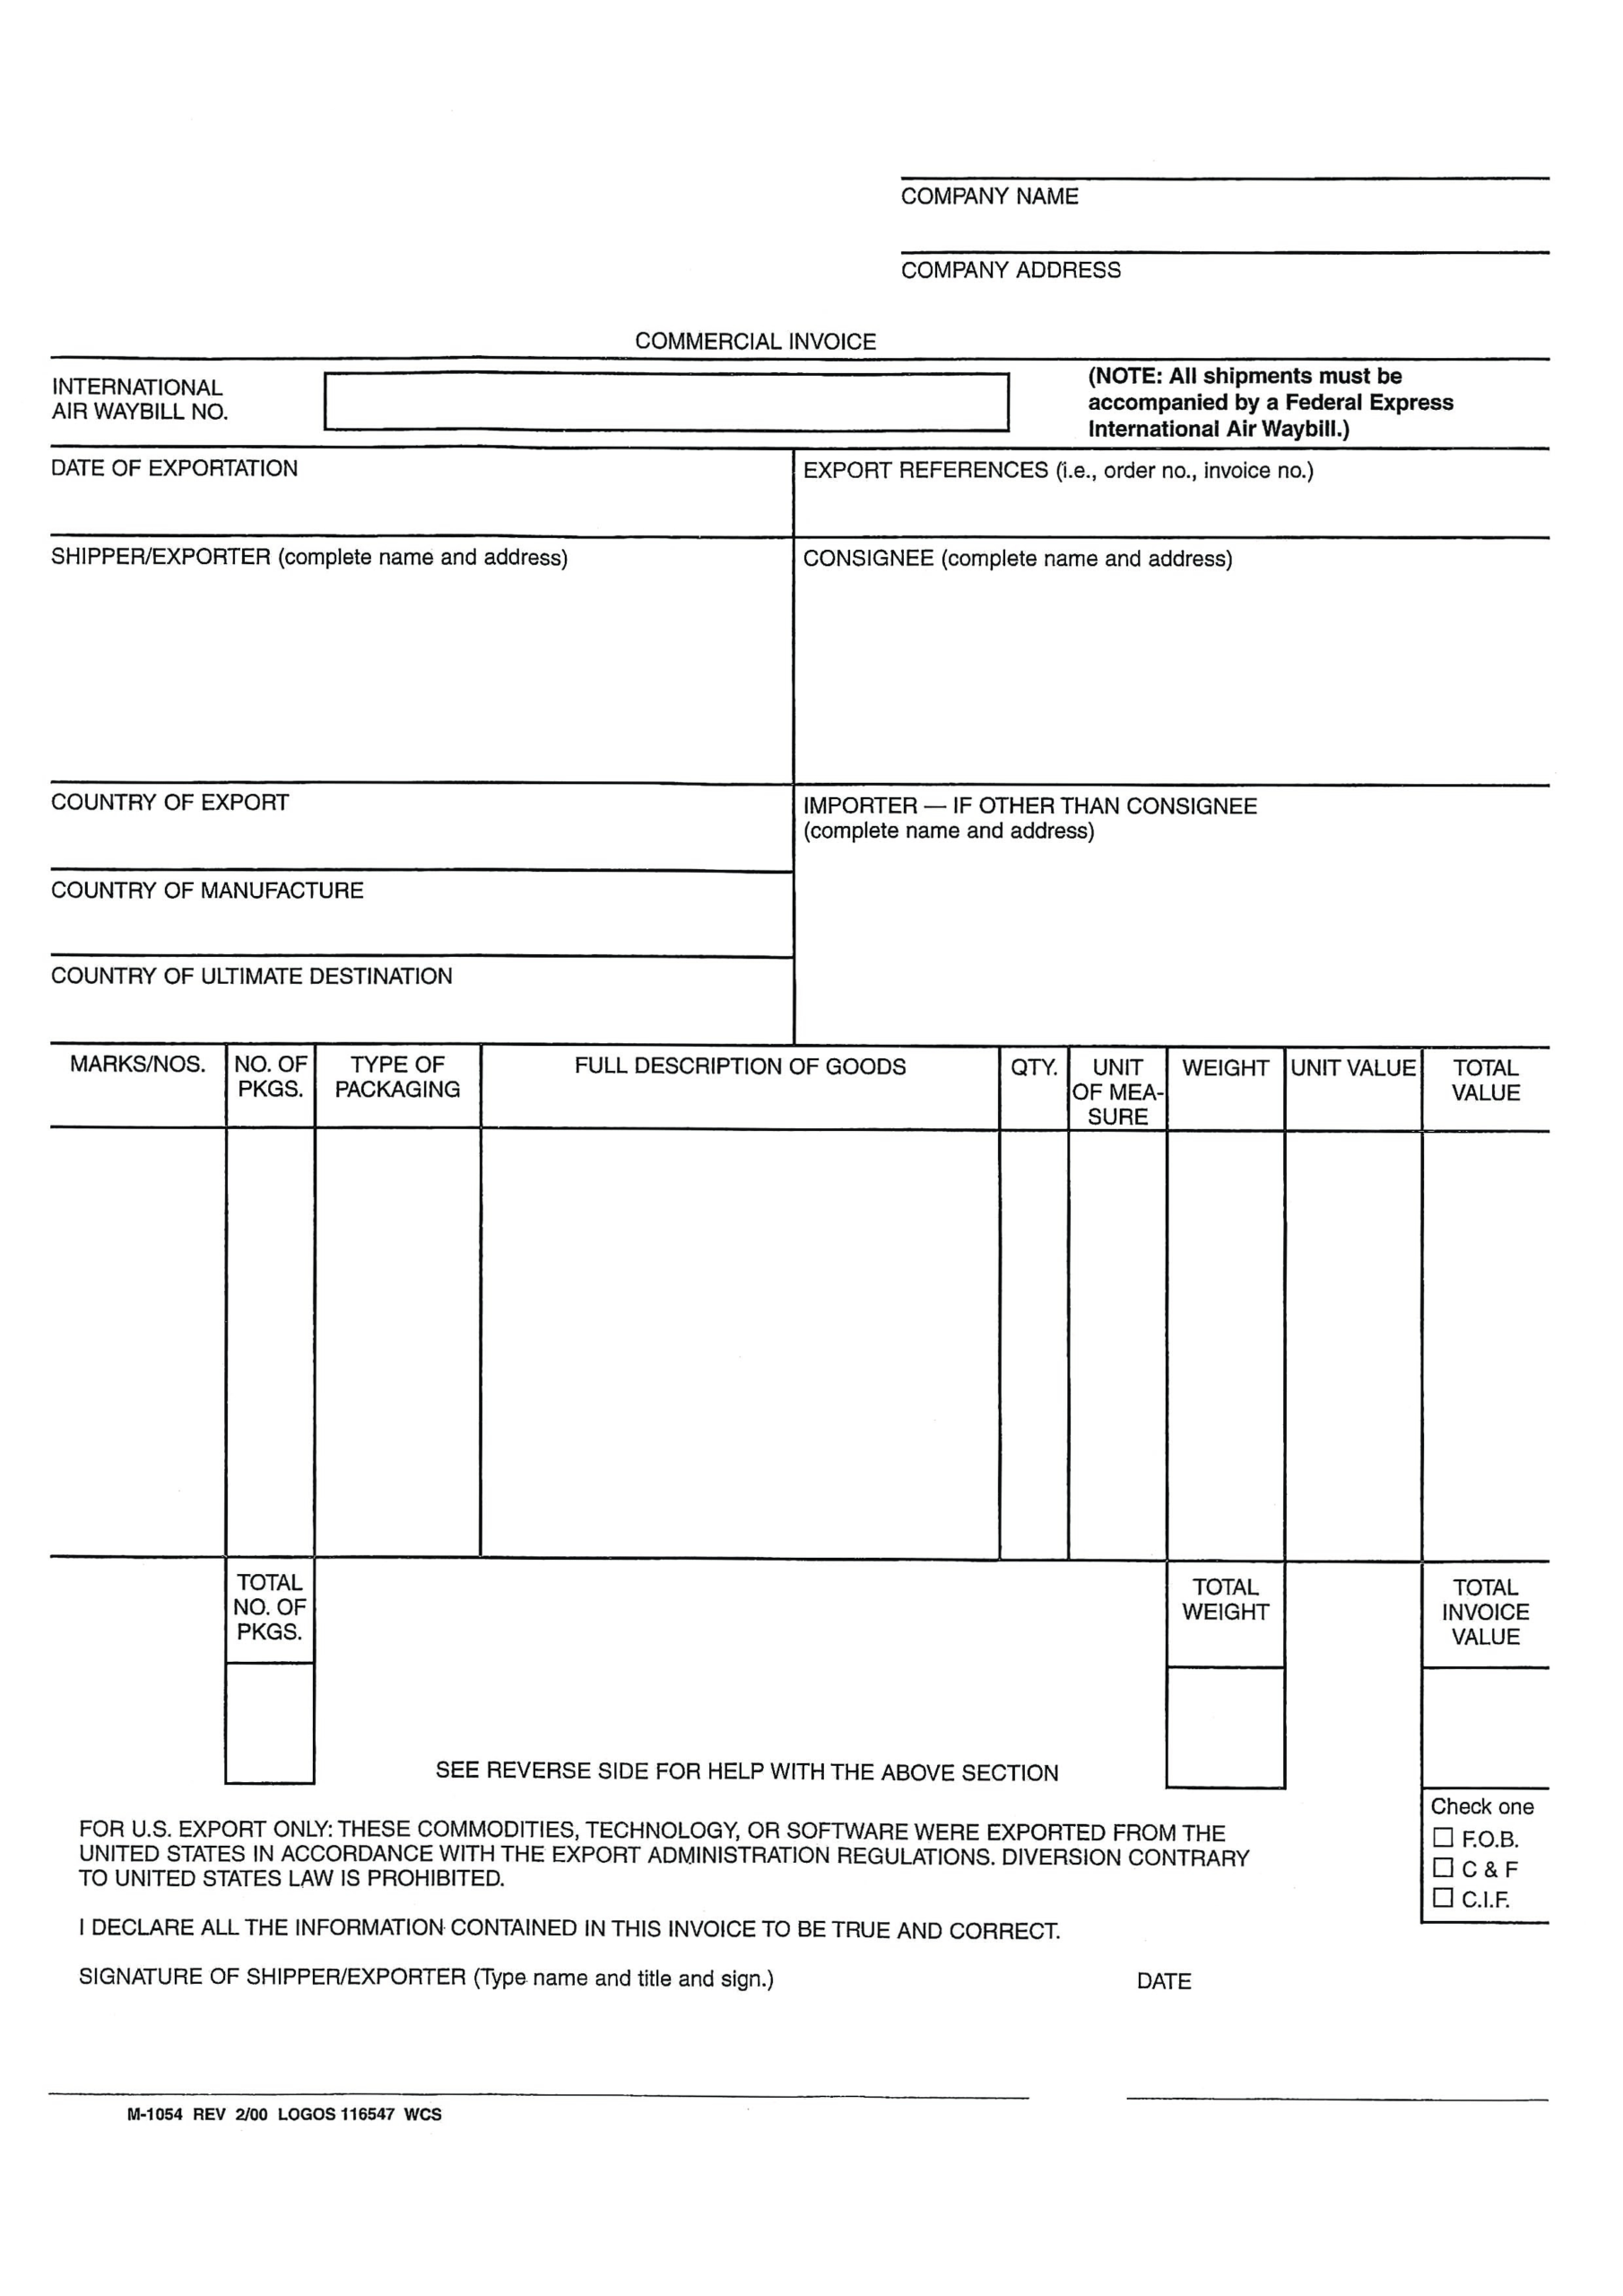 Blank Commercial Invoice Word | Templates At With Commercial Invoice Template Word Doc